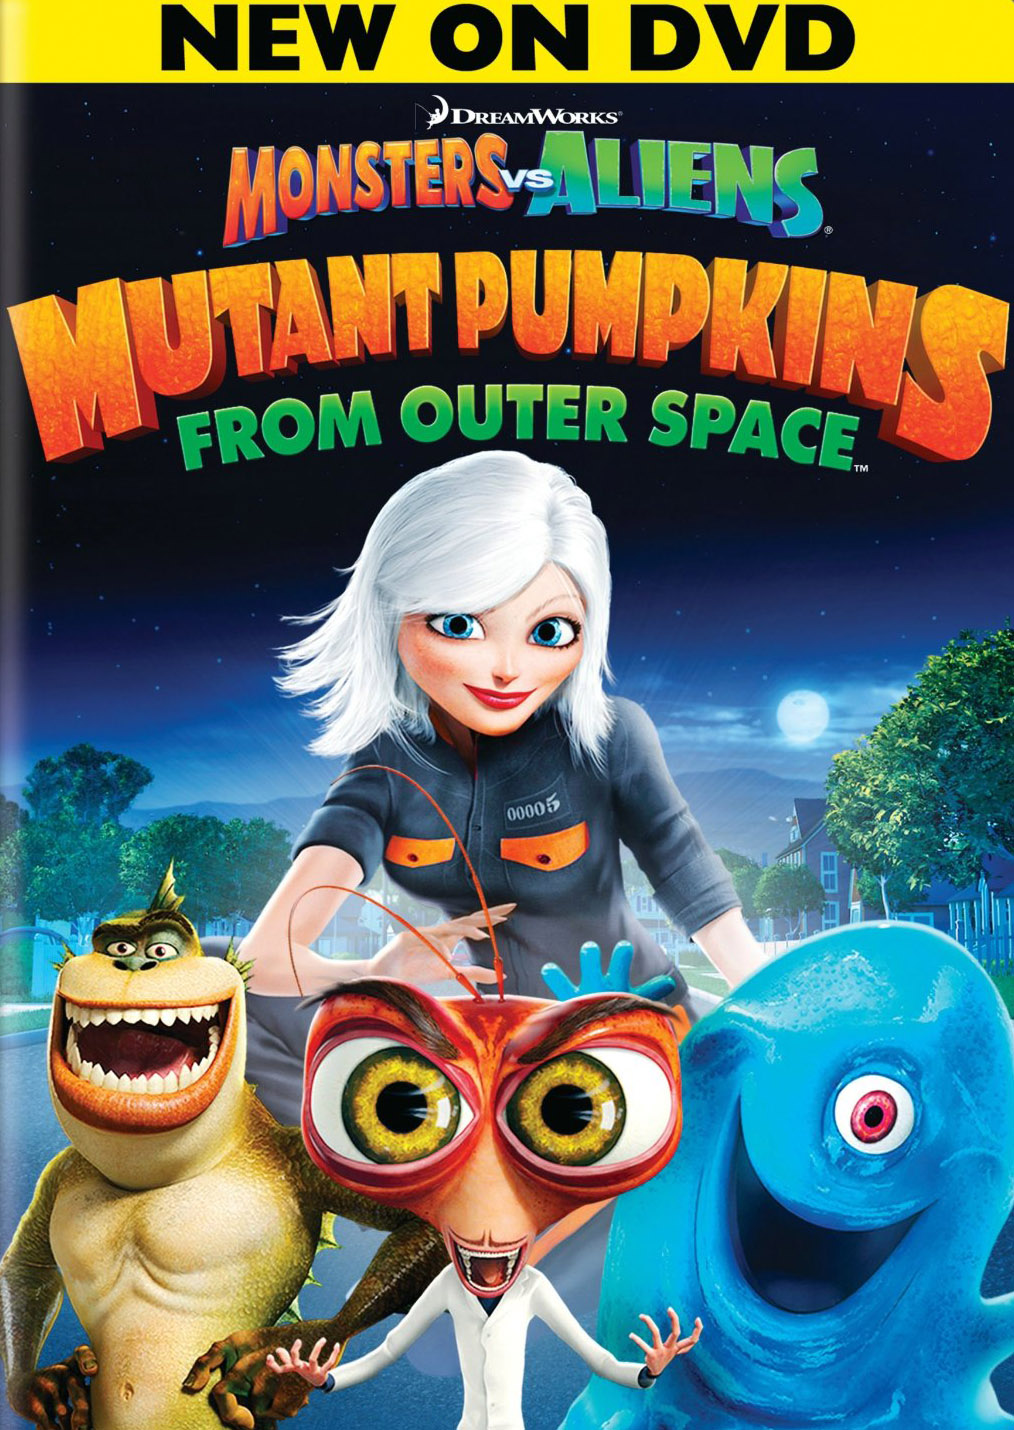 monsters-vs-aliens-mutant-pumpkins-from-outer-space-dvd-2009-best-buy